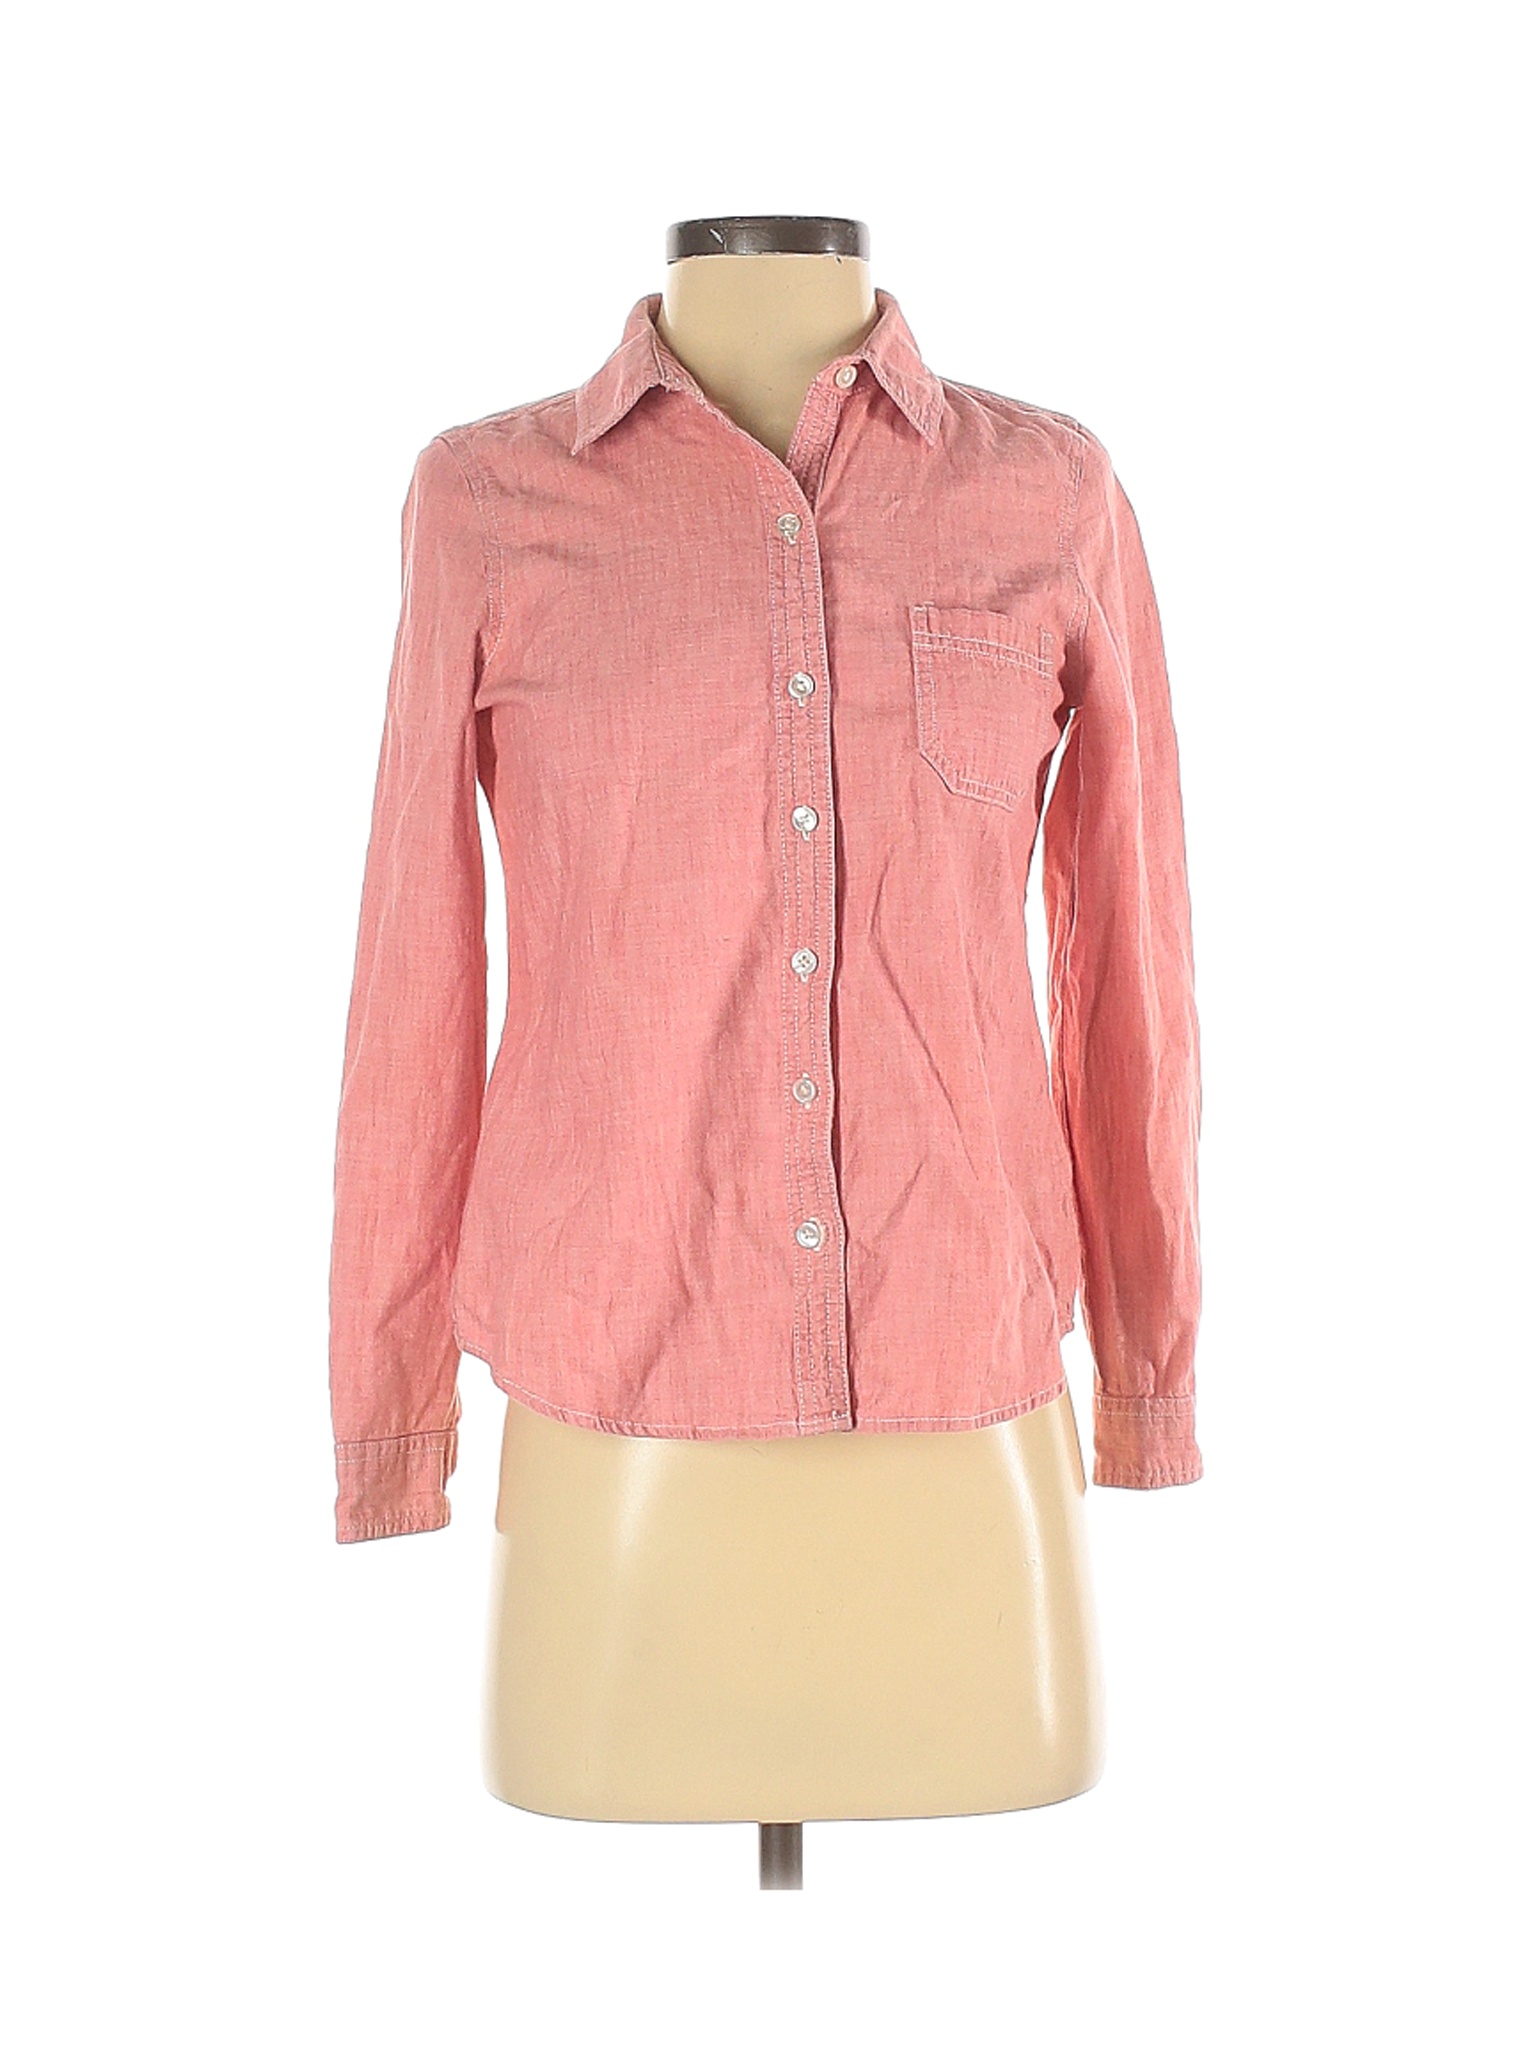 pinkish red button up shirt old navy